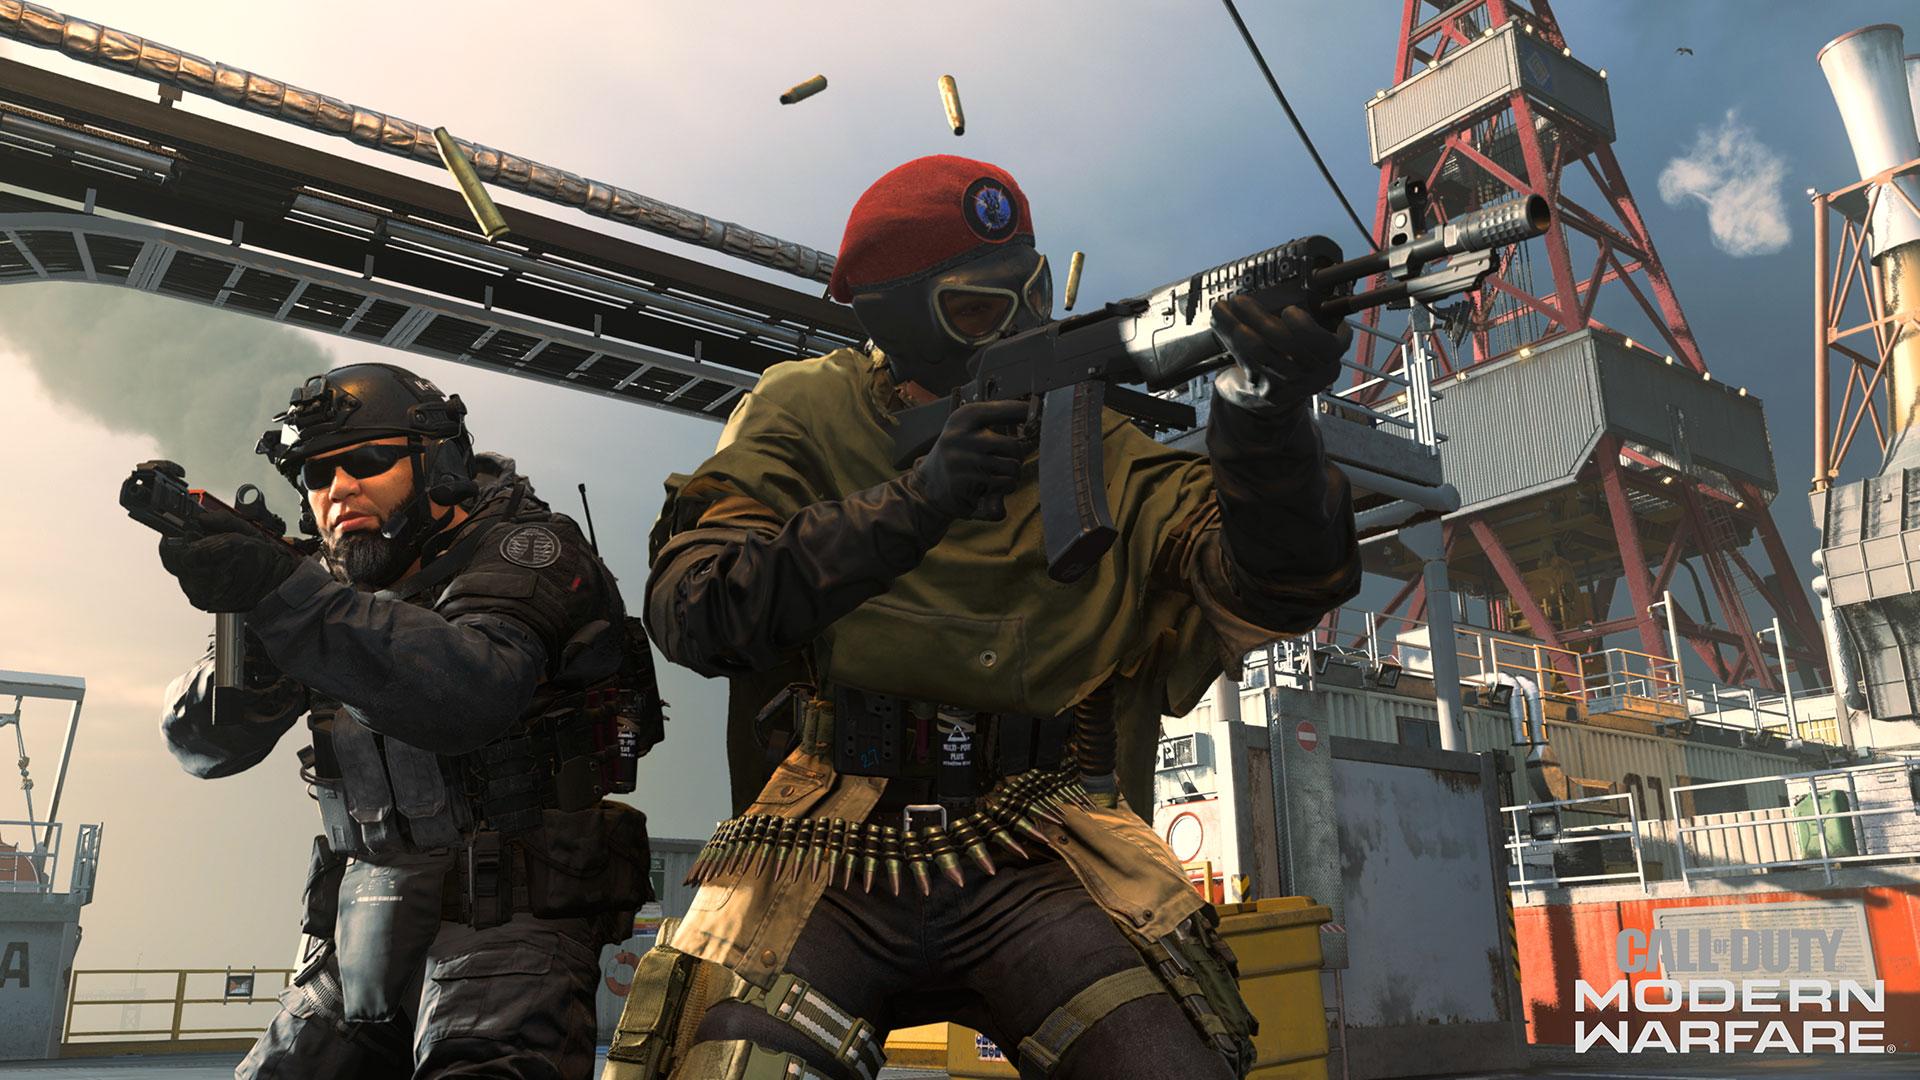 Infinity Ward have added two new guns, the AN-94 AR and ISO SMG, in the new Season 5 update.